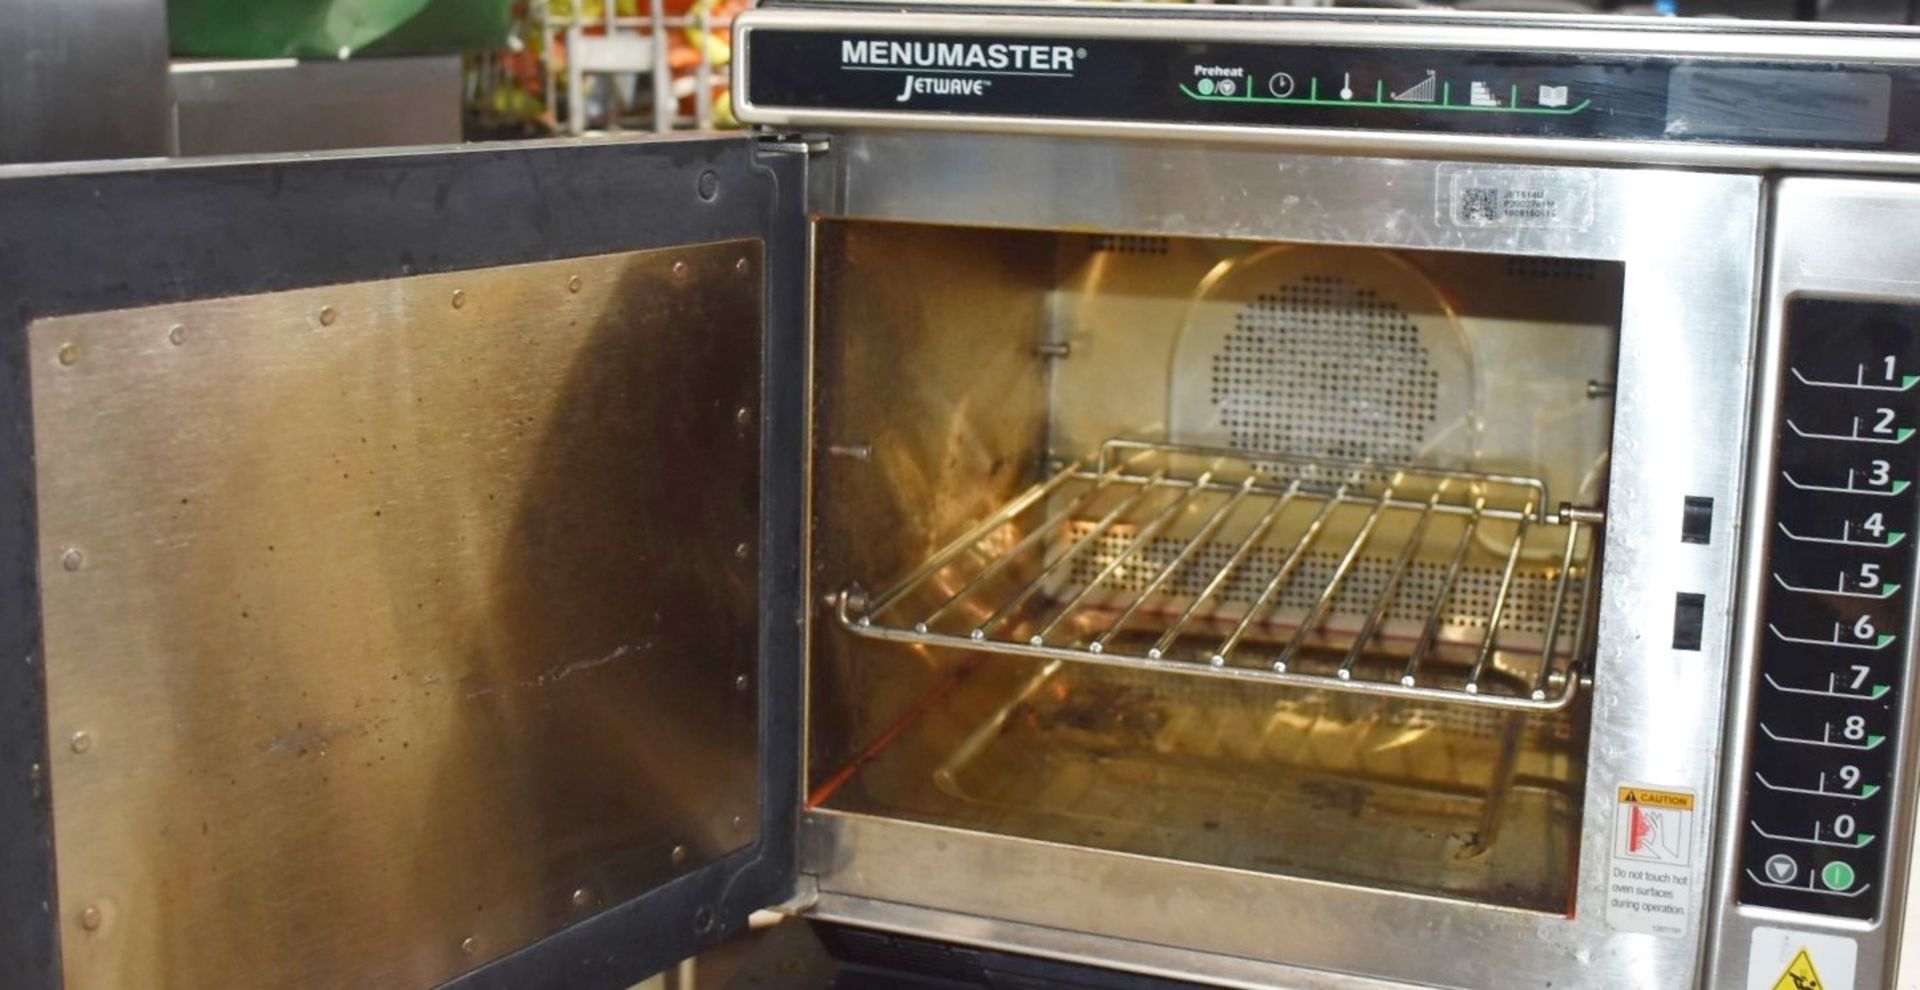 1 x Menumaster Jetwave JET514U High Speed Combination Microwave Oven - RRP £2,400 - Manufacture - Image 3 of 9